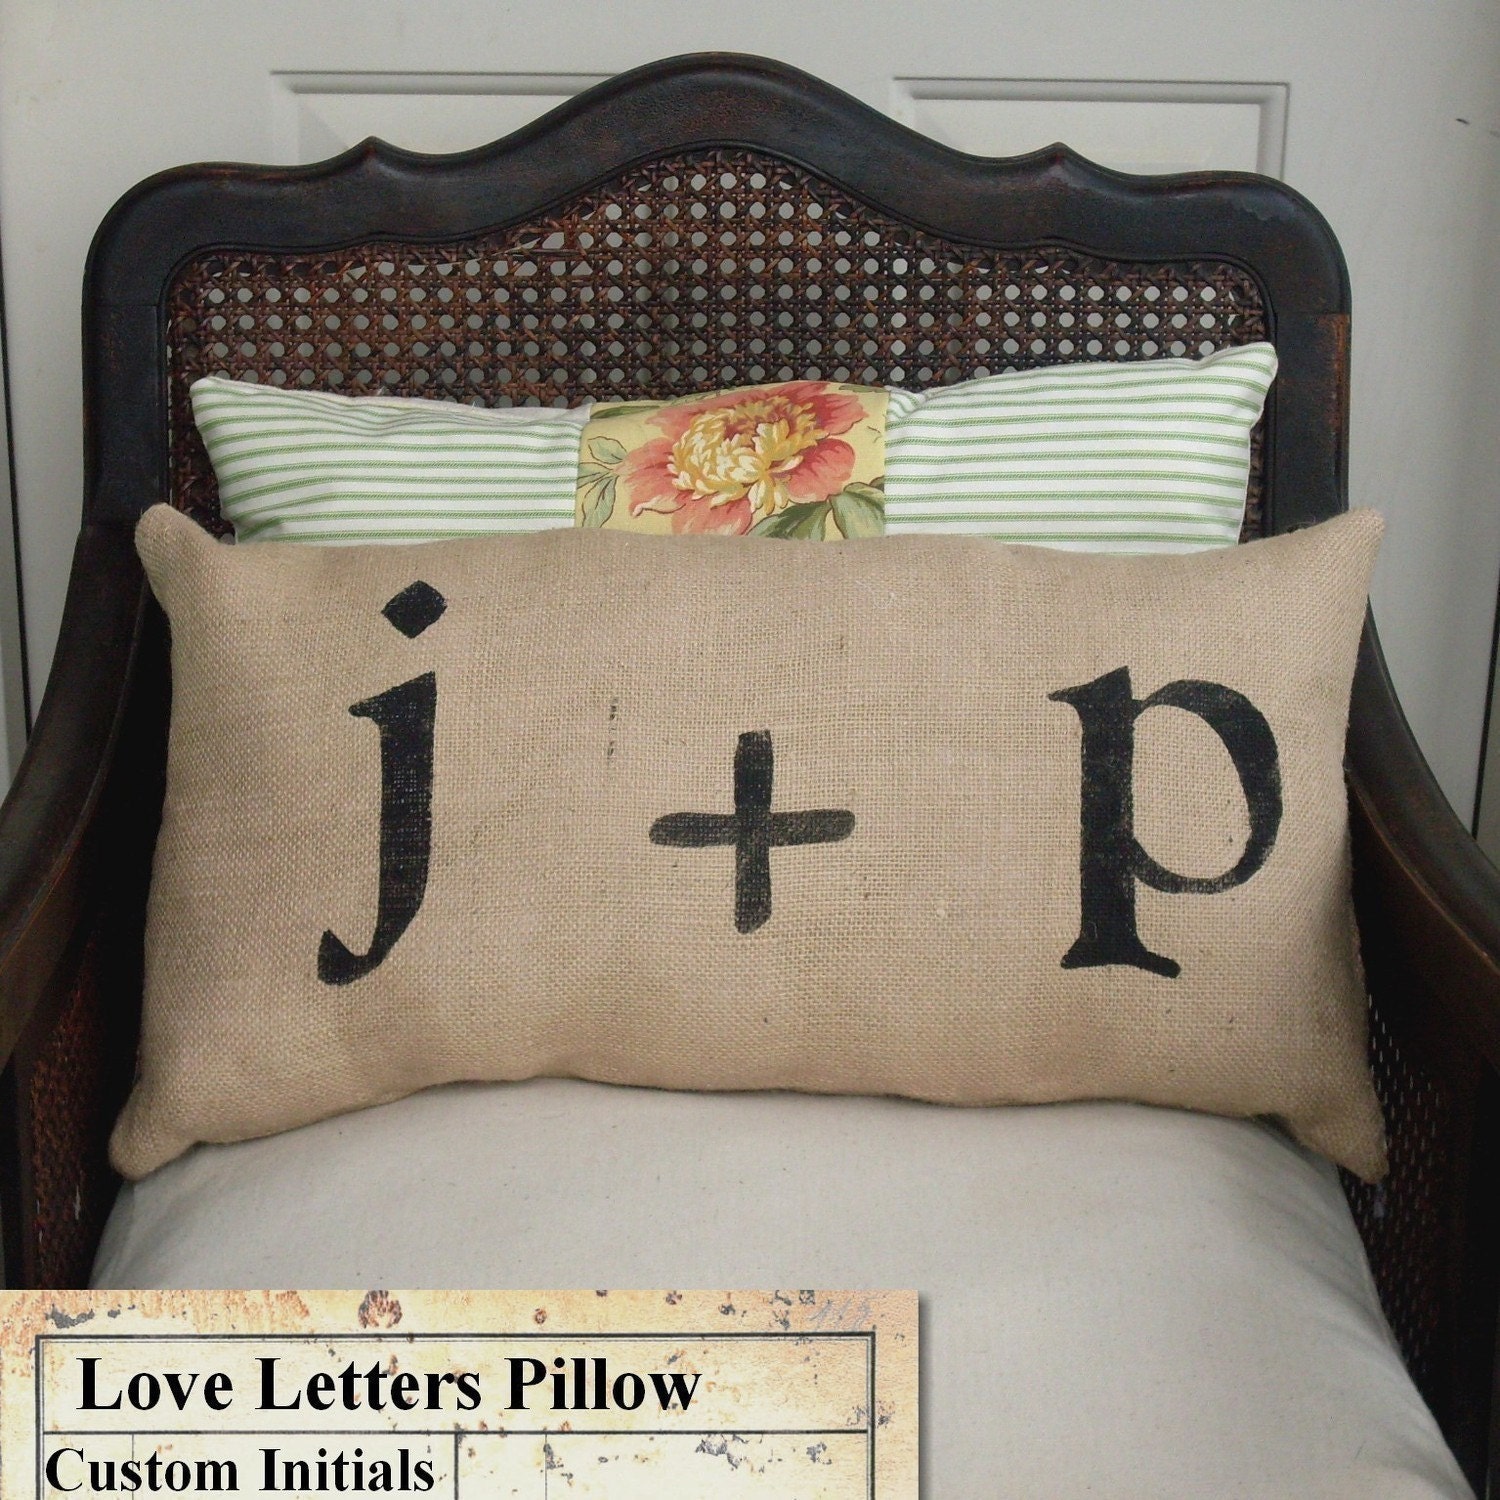 Love Letters - Burlap Feed Sack Pillow - Personalize with you and your sweetie's initial